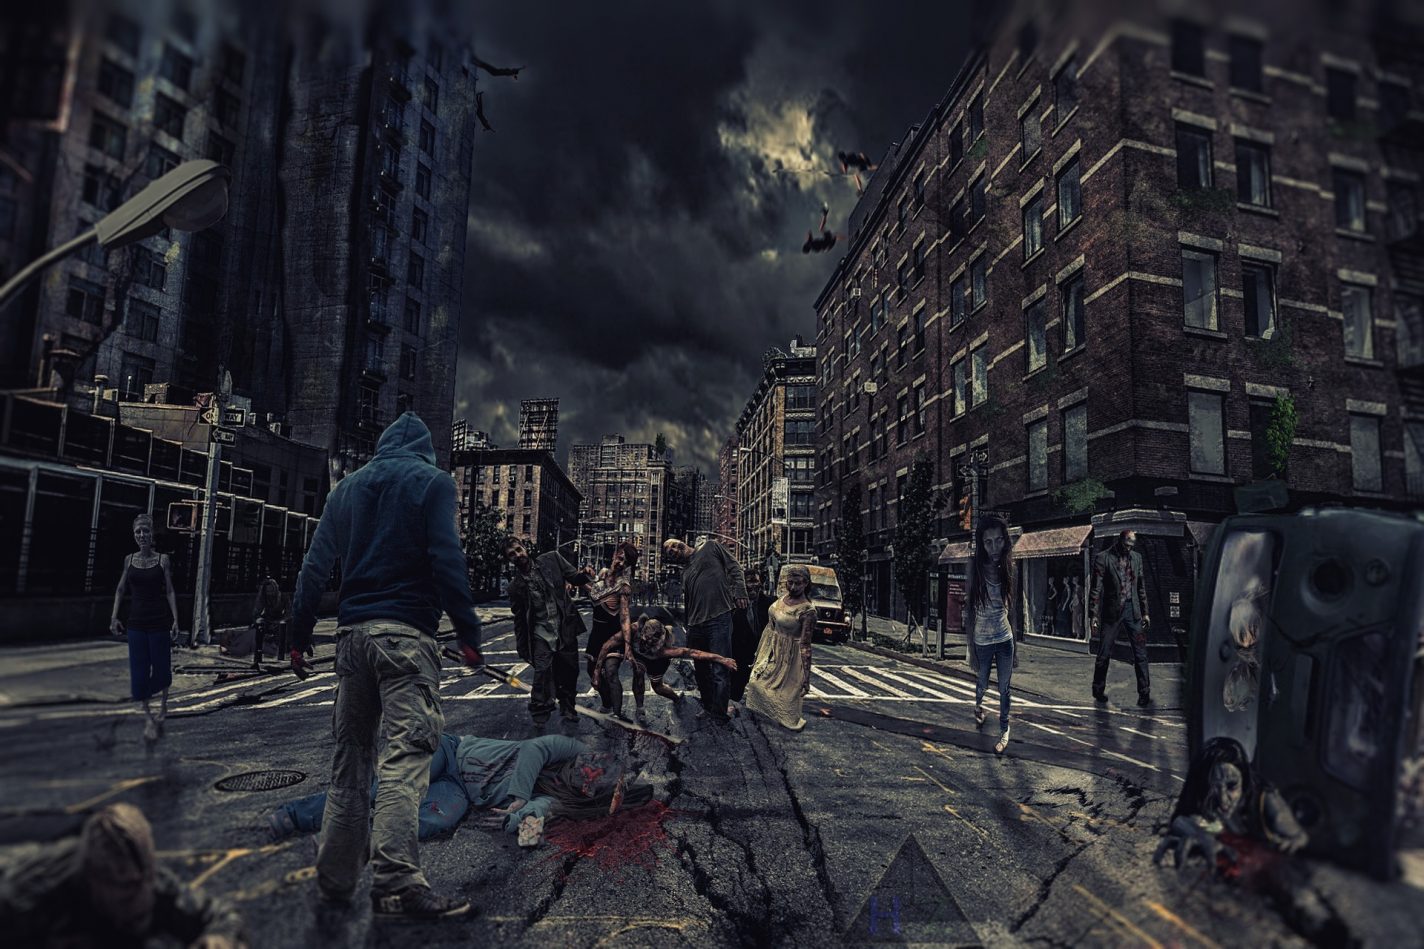 This shows zombies from a movie wandering the streets of a dark city